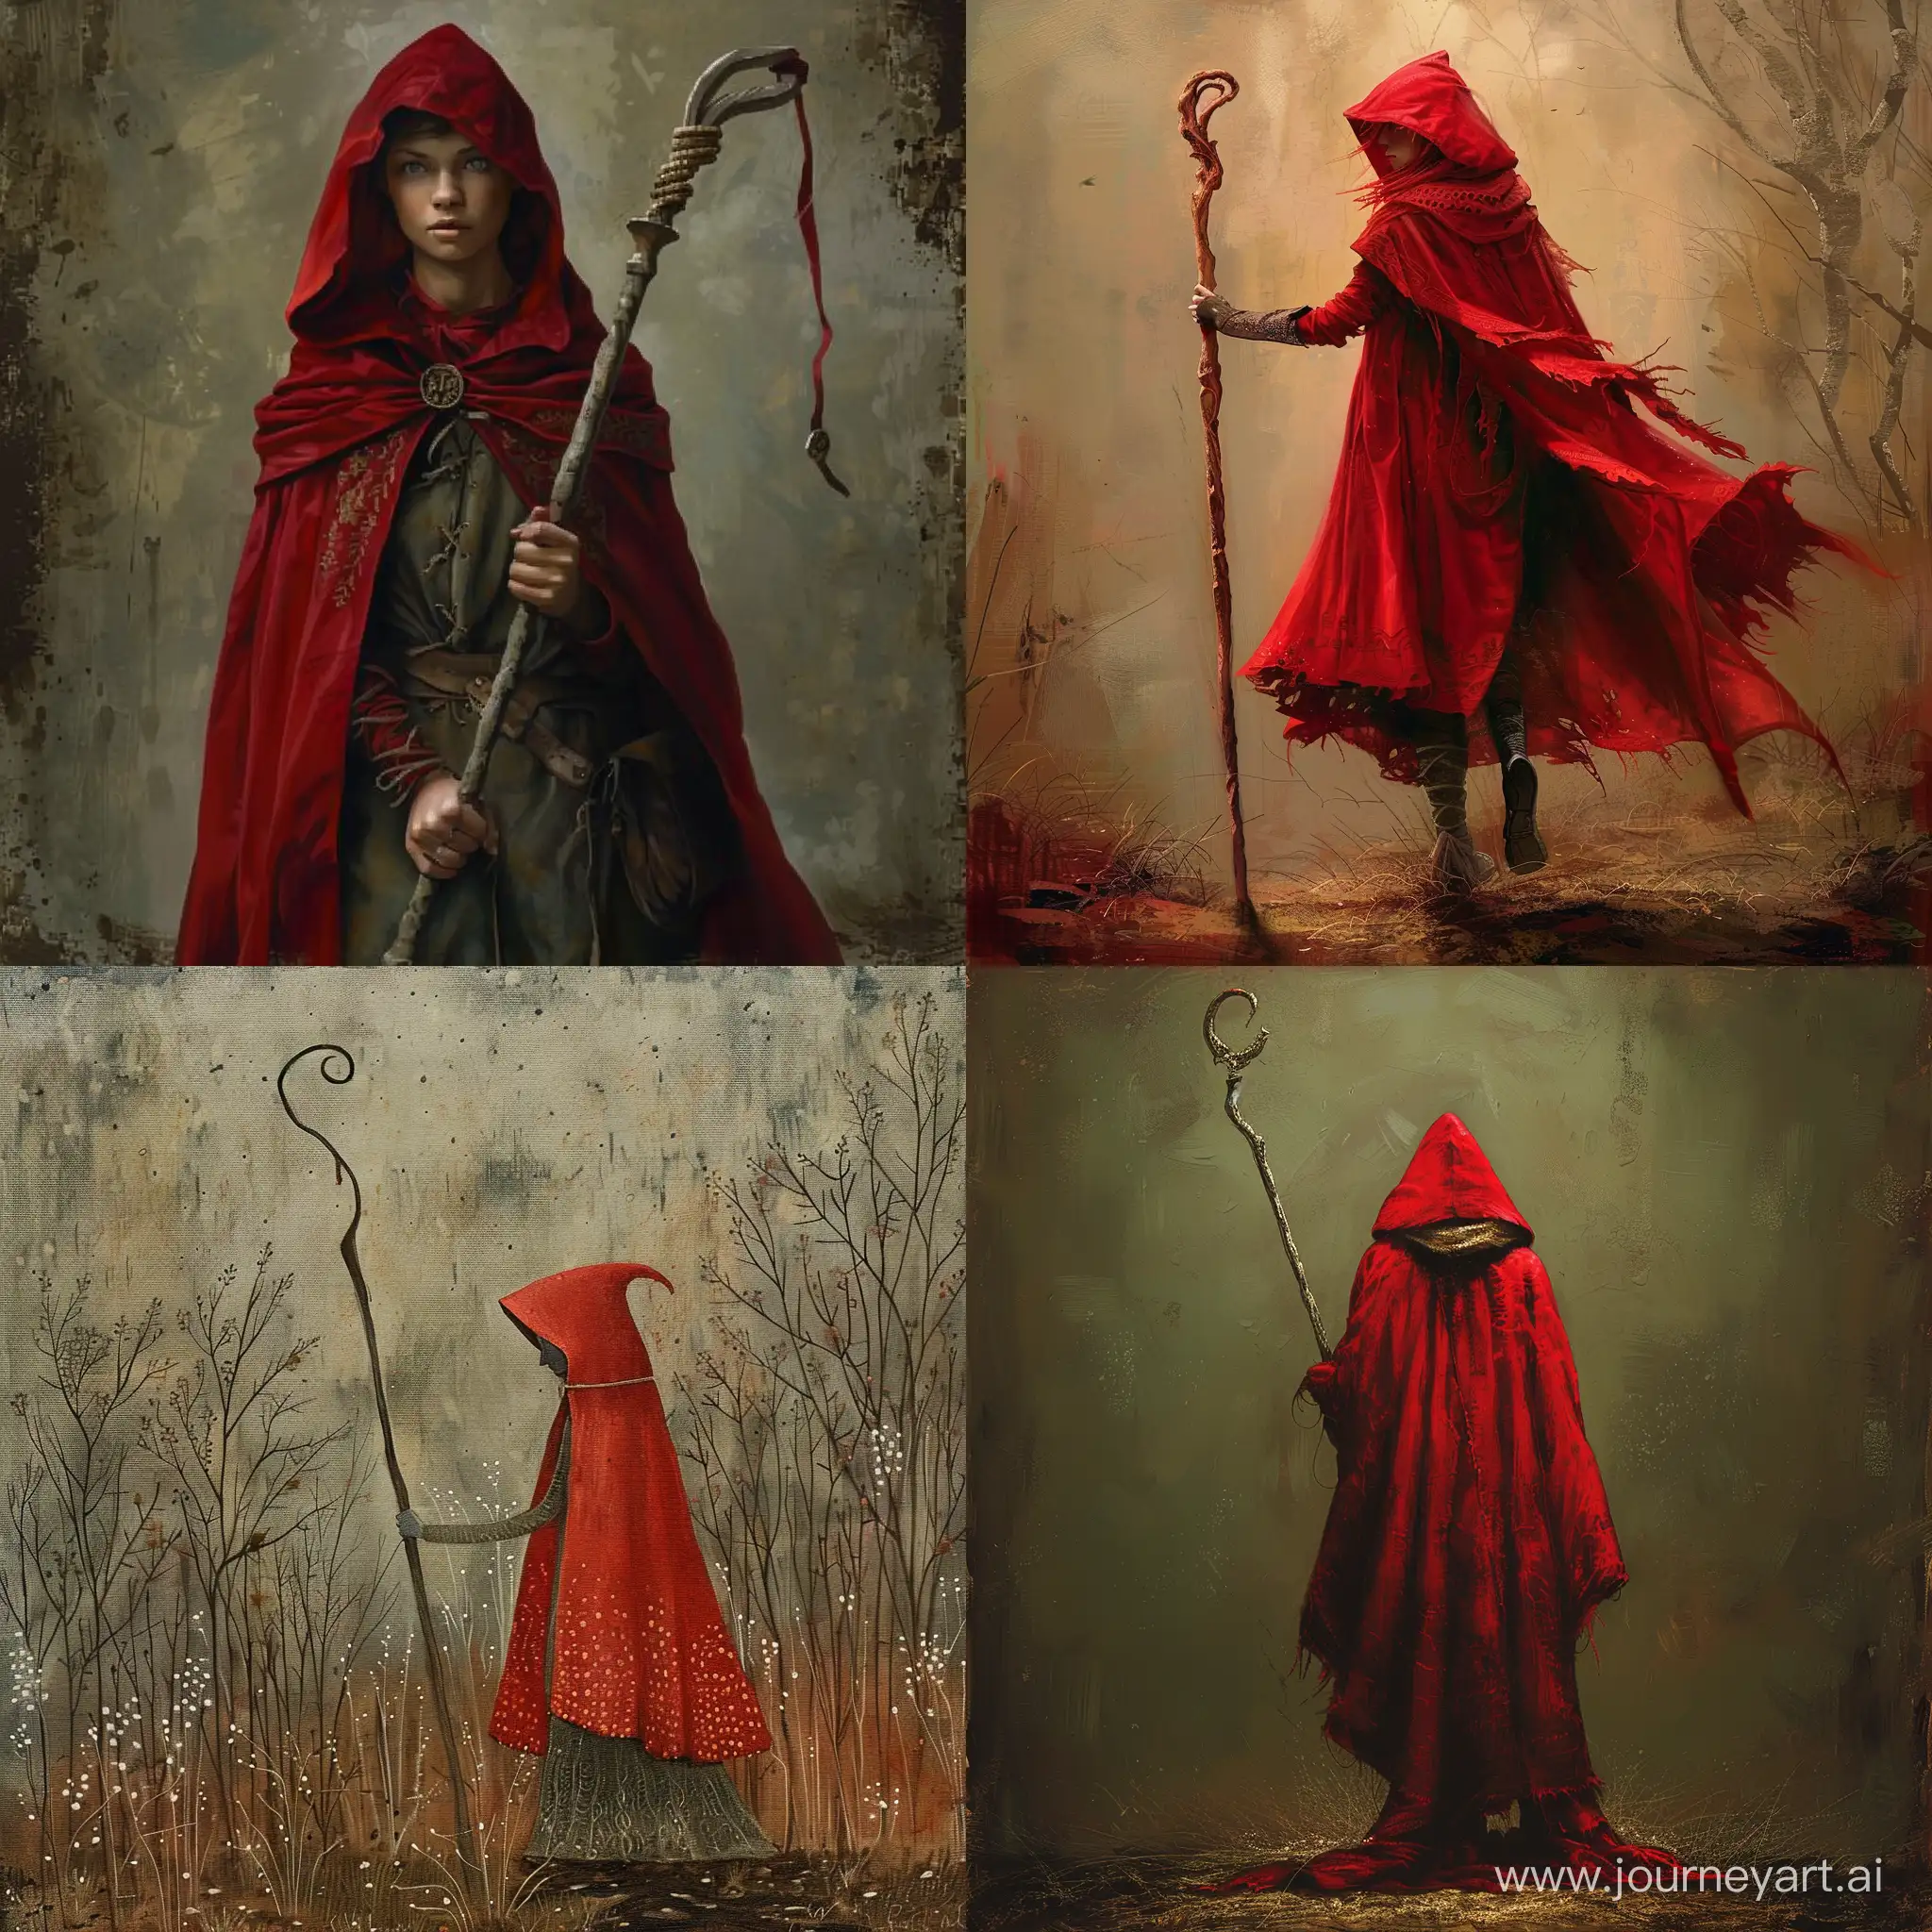 Red-Riding-Hood-Holding-Staff-in-Enchanted-Forest